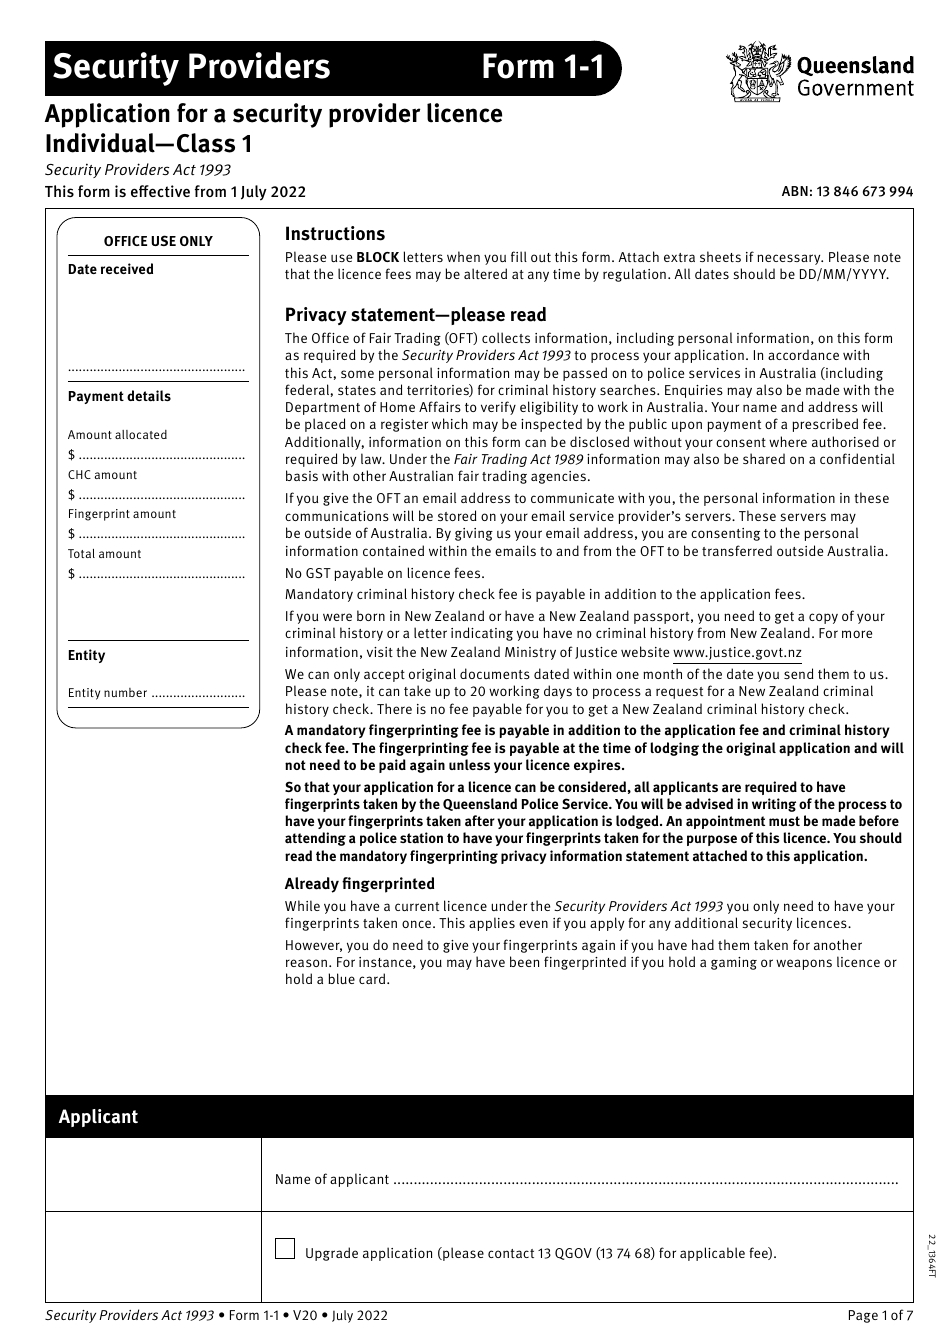 Form 1-1 Application for a Security Provider Licence Individual - Class 1 - Queensland, Australia, Page 1